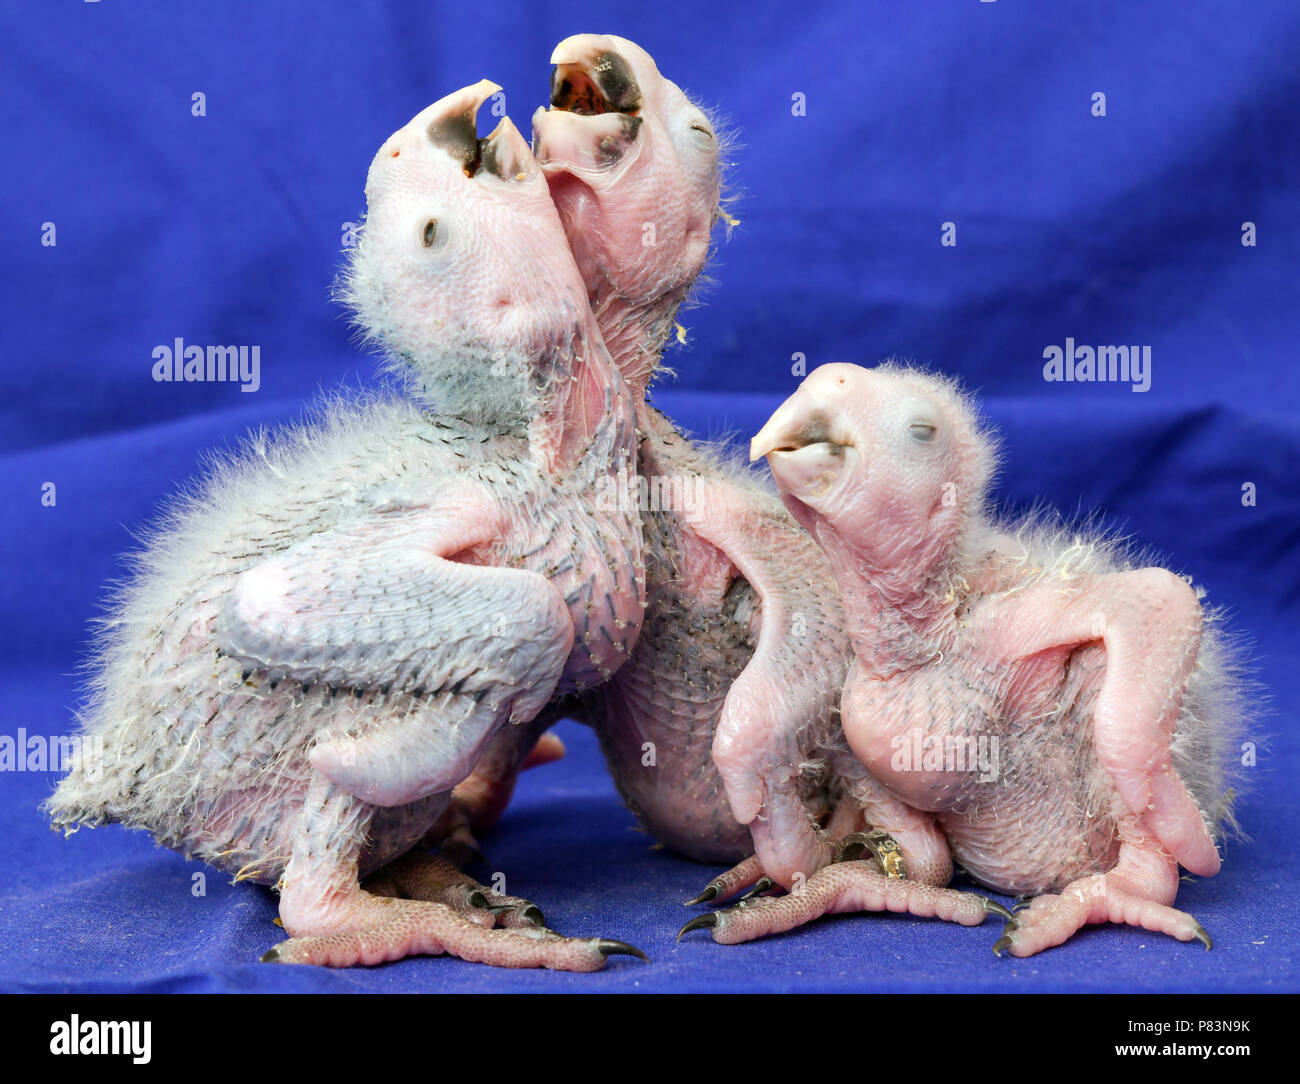 28 June 2018, Germany, Schoeneiche: Three about three-week-old Spix Ara chicks can be seen at the breeding station of the nature conservation organisation Association for the Conservation of Threatened Parrots e.V. (ACTP). Brazil's Environment Minister Duarte is to open the facility for the resettlement of the ACTP Spix Aras. The Spix-Ara (Cyanopsitta spixii) is a blue type of parrot, which is originally from Rio Sao Francisco (Bahia, Brazil) and has been extinct in the wild since the year 2000. Governments and private non-profit organisation have gotten together to help save this species fro Stock Photo